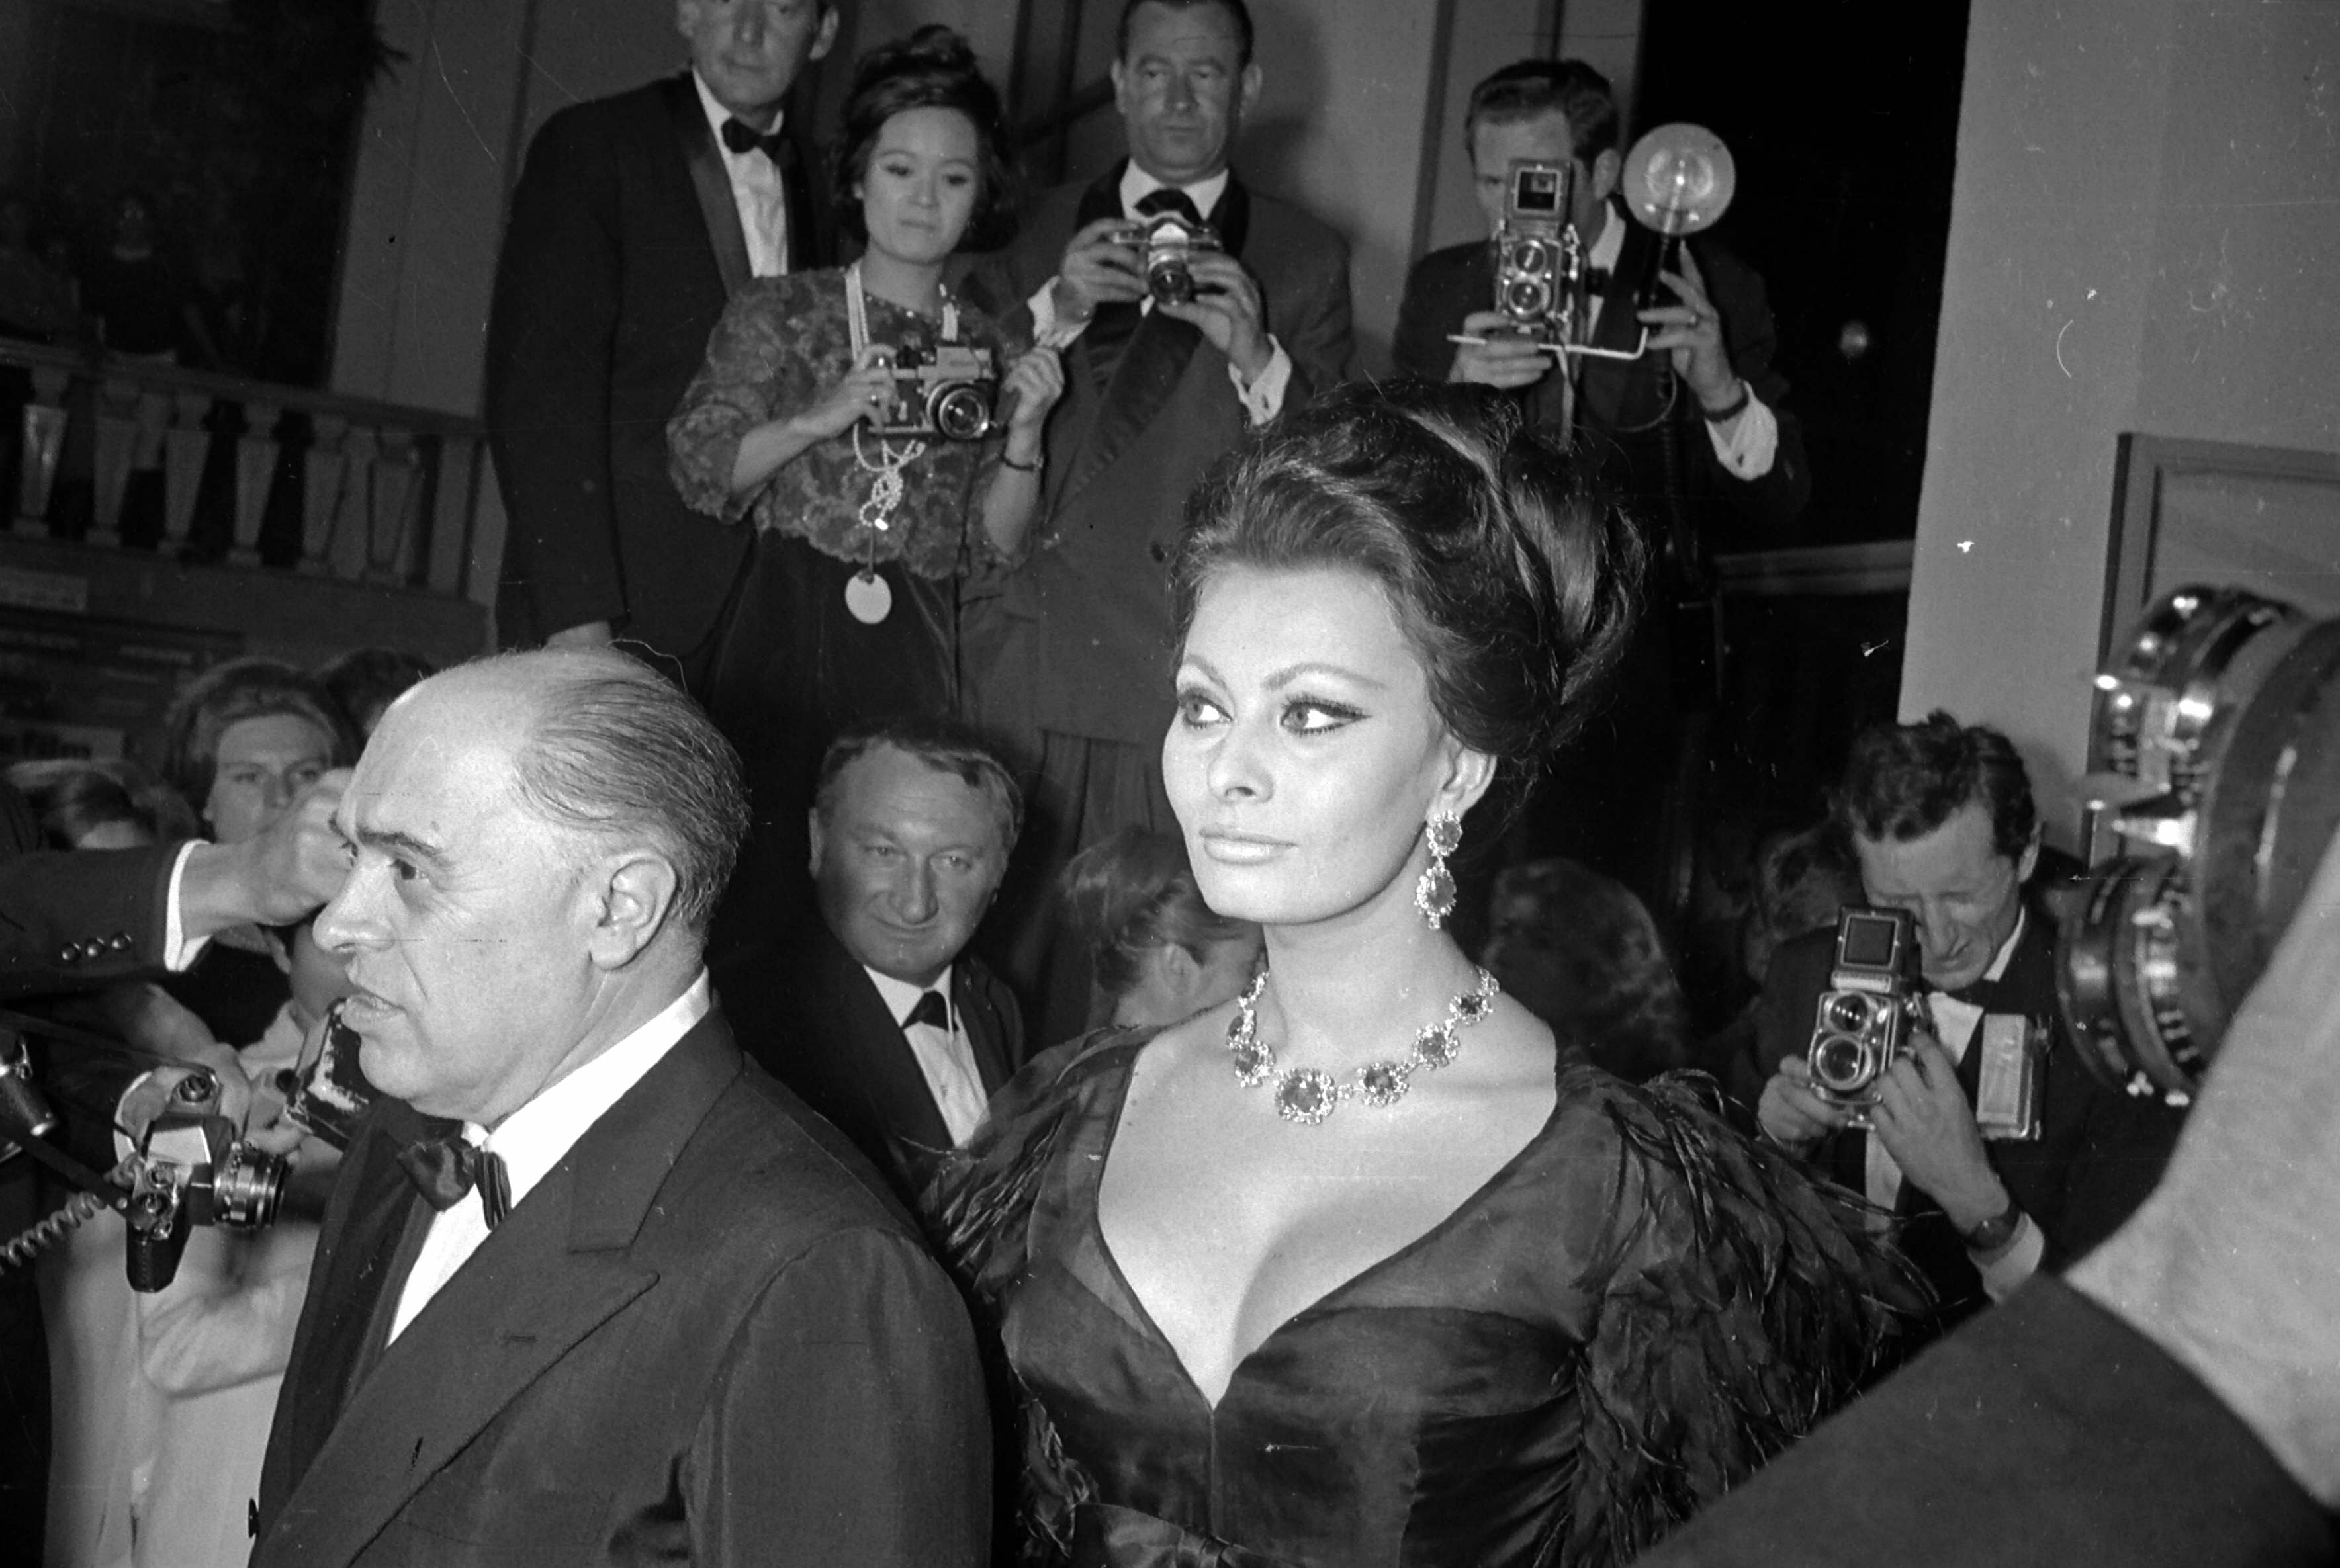 Carlo Ponti, Italian movies producer and Sophia Loren, Italian actress, his wife during the Cannes Festival, 1966. | Photo: Getty Images